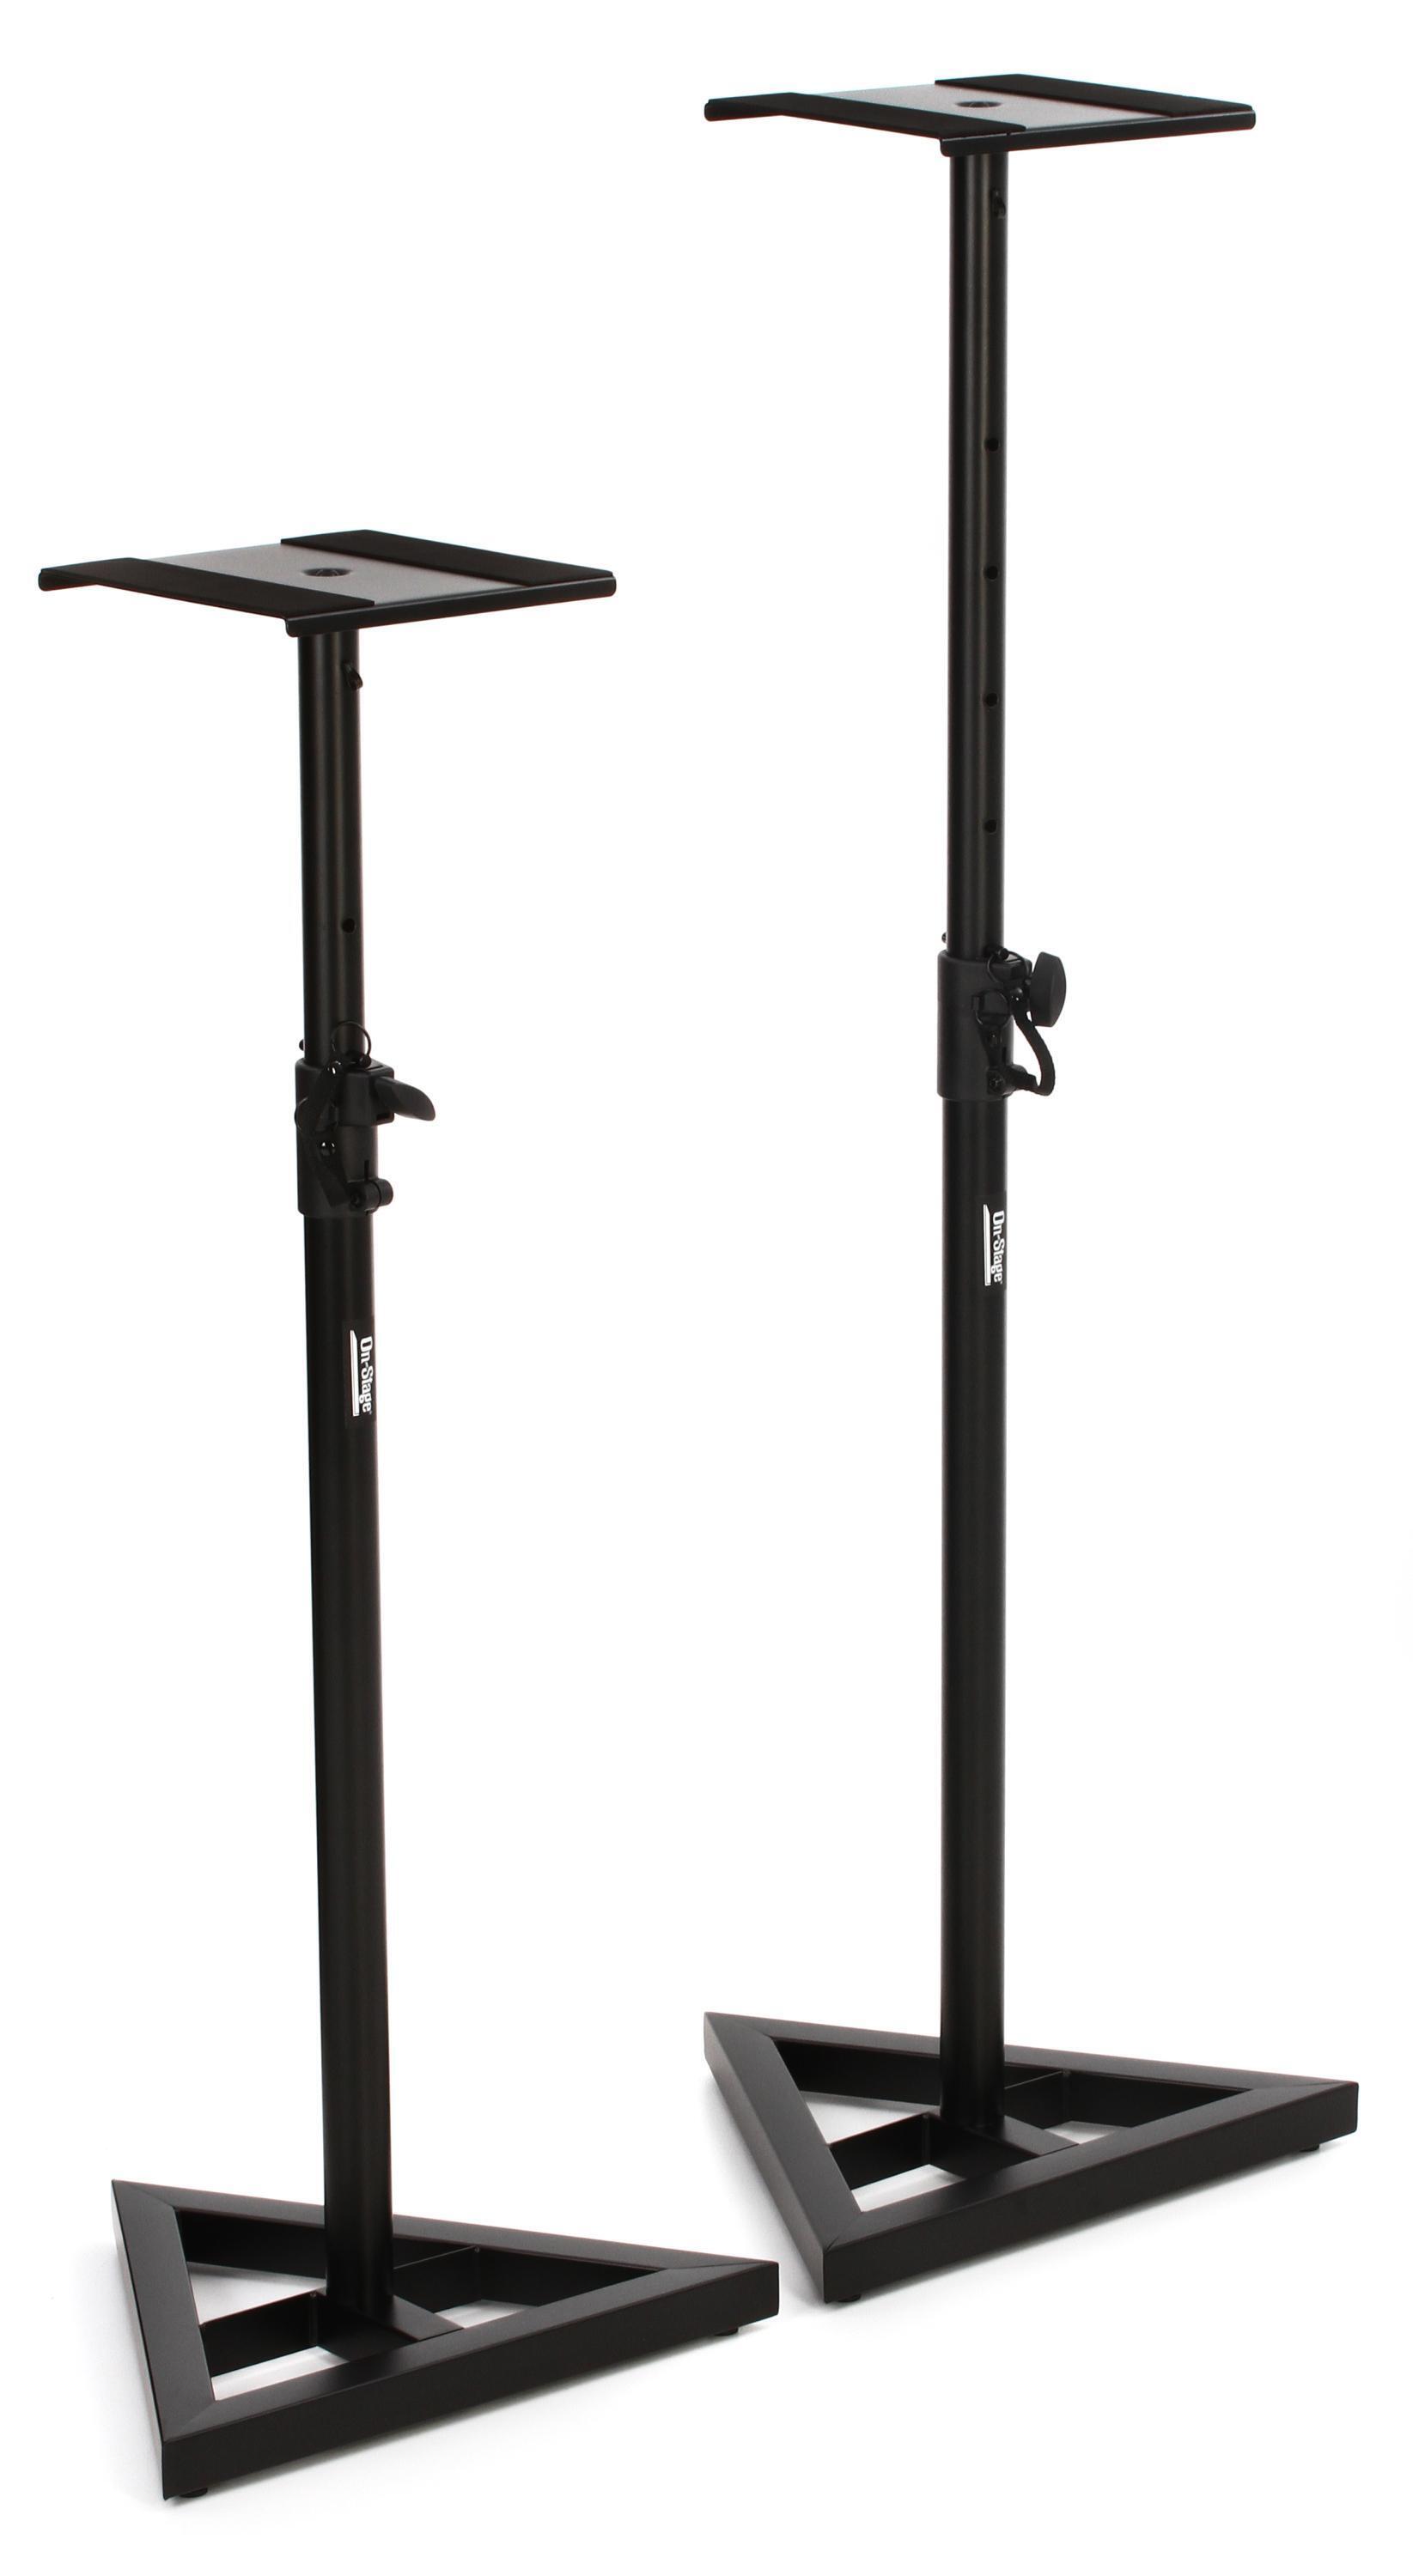 Bundled Item: On-Stage SMS6000-P Studio Monitor Stands